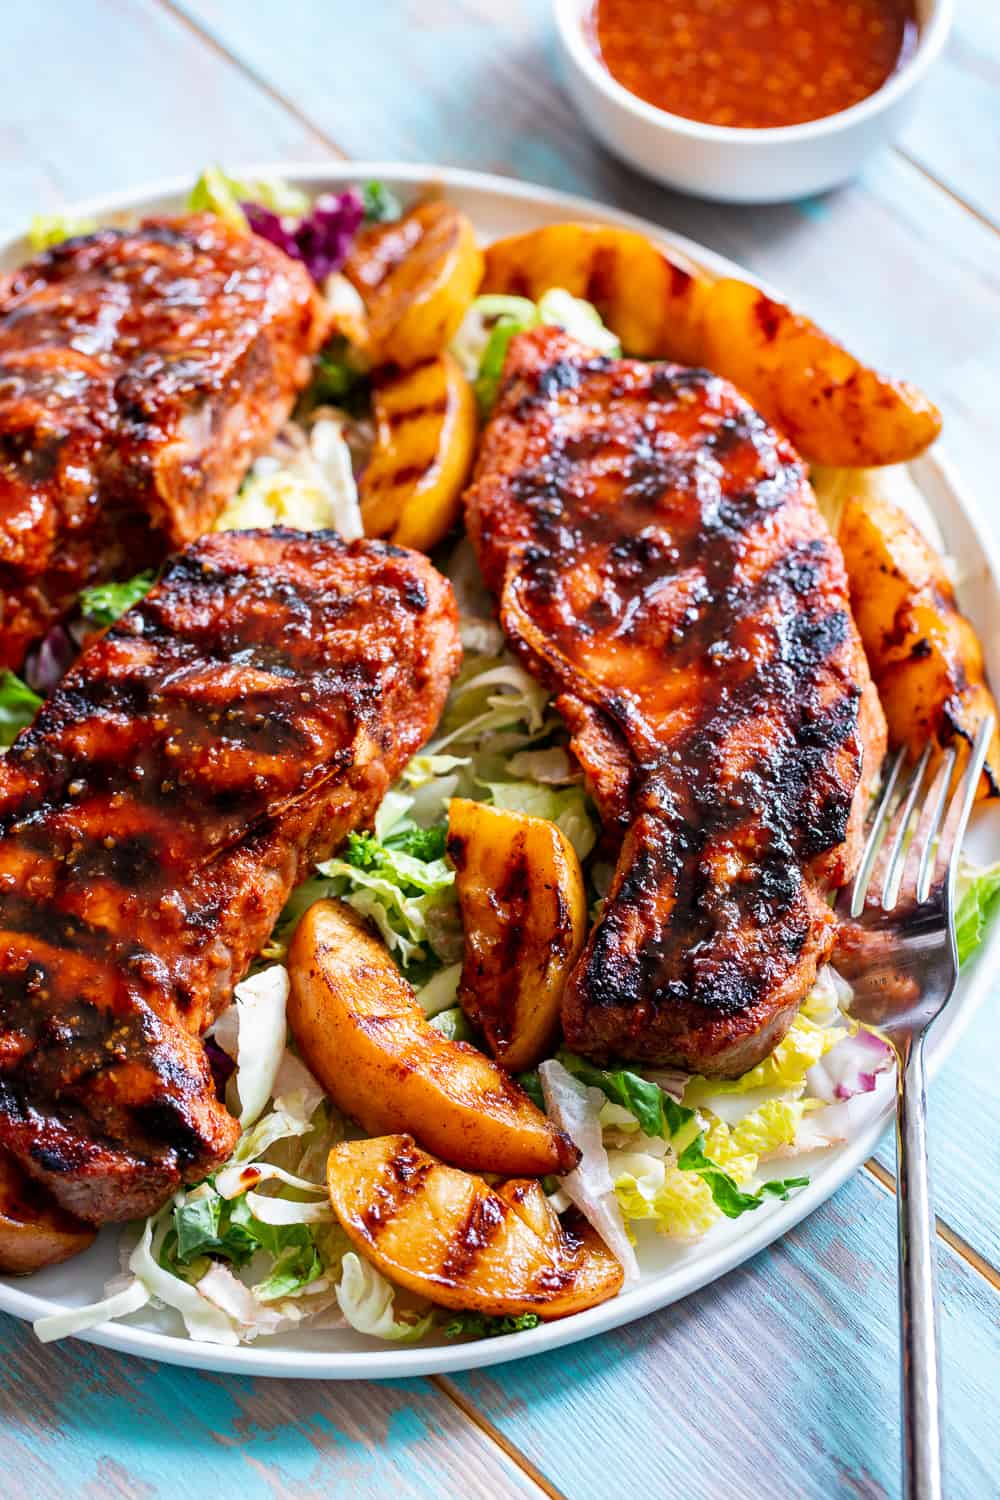 These easy paleo grilled pork chops have a simple and delicious used as both a marinade and dipping sauce for extra flavor.  The peaches add sweet summer flair to the chops which you can serve with any of your favorite sides!  Gluten free, dairy free, soy free, refined sugar free and a Whole30 option.  #paleo #cleaneating #Whole30 #porkchops 